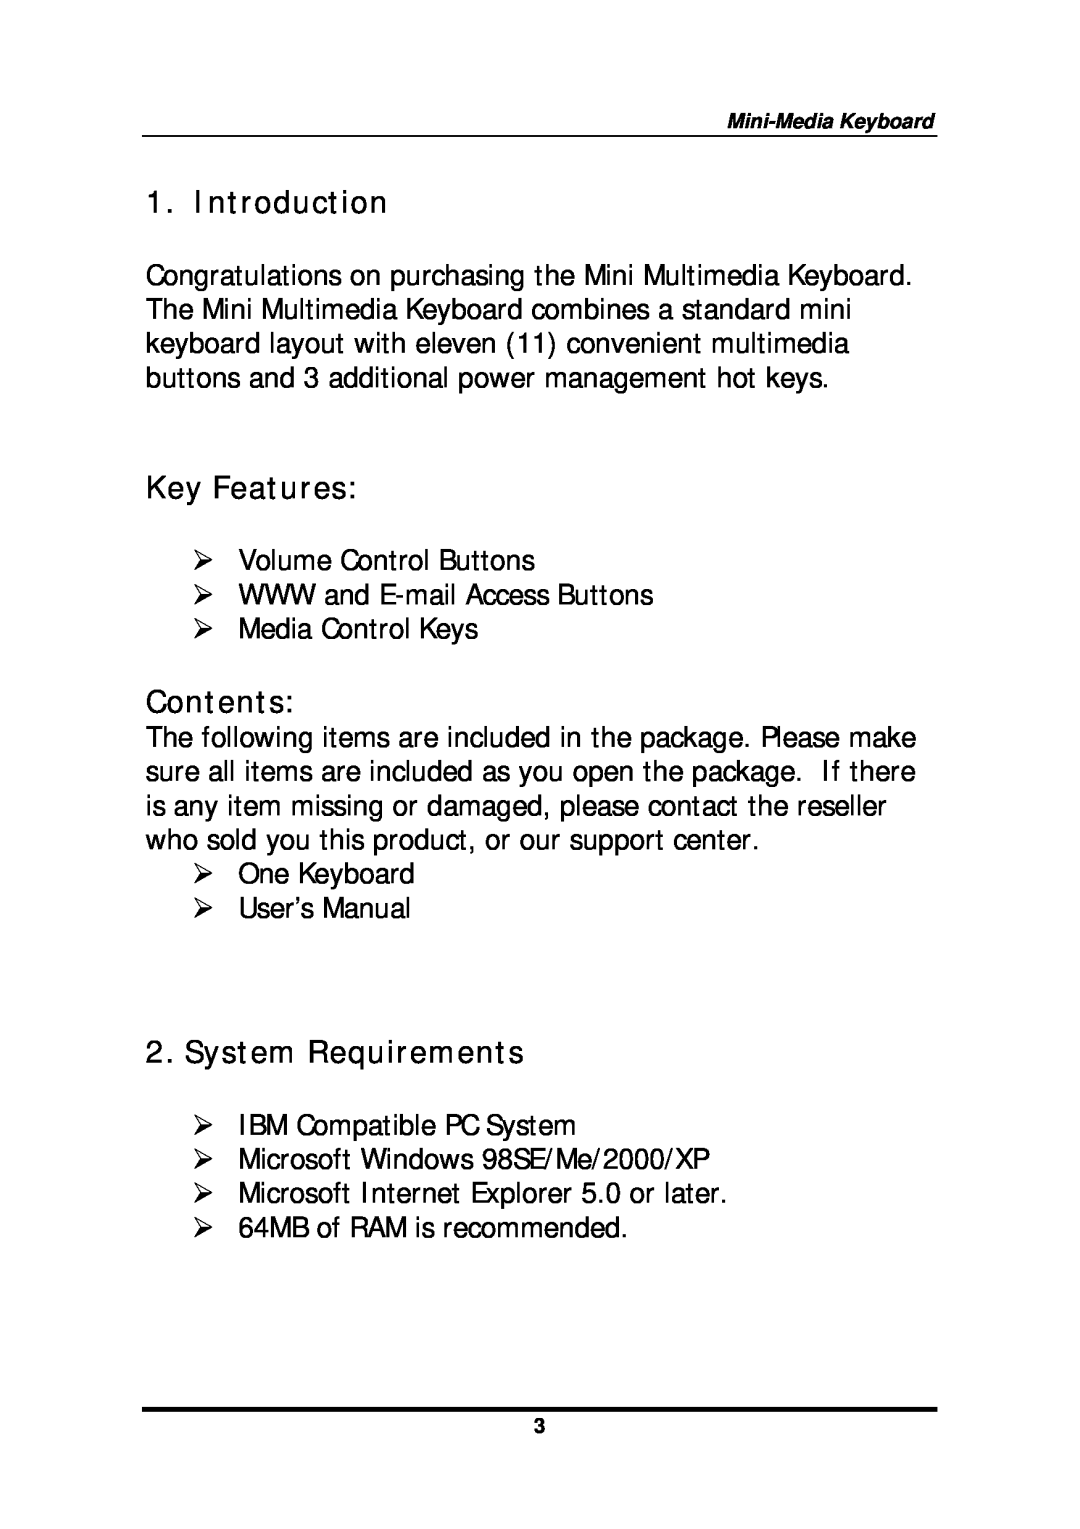 Adesso MCK-91 user manual Introduction, Key Features, Contents, System Requirements 